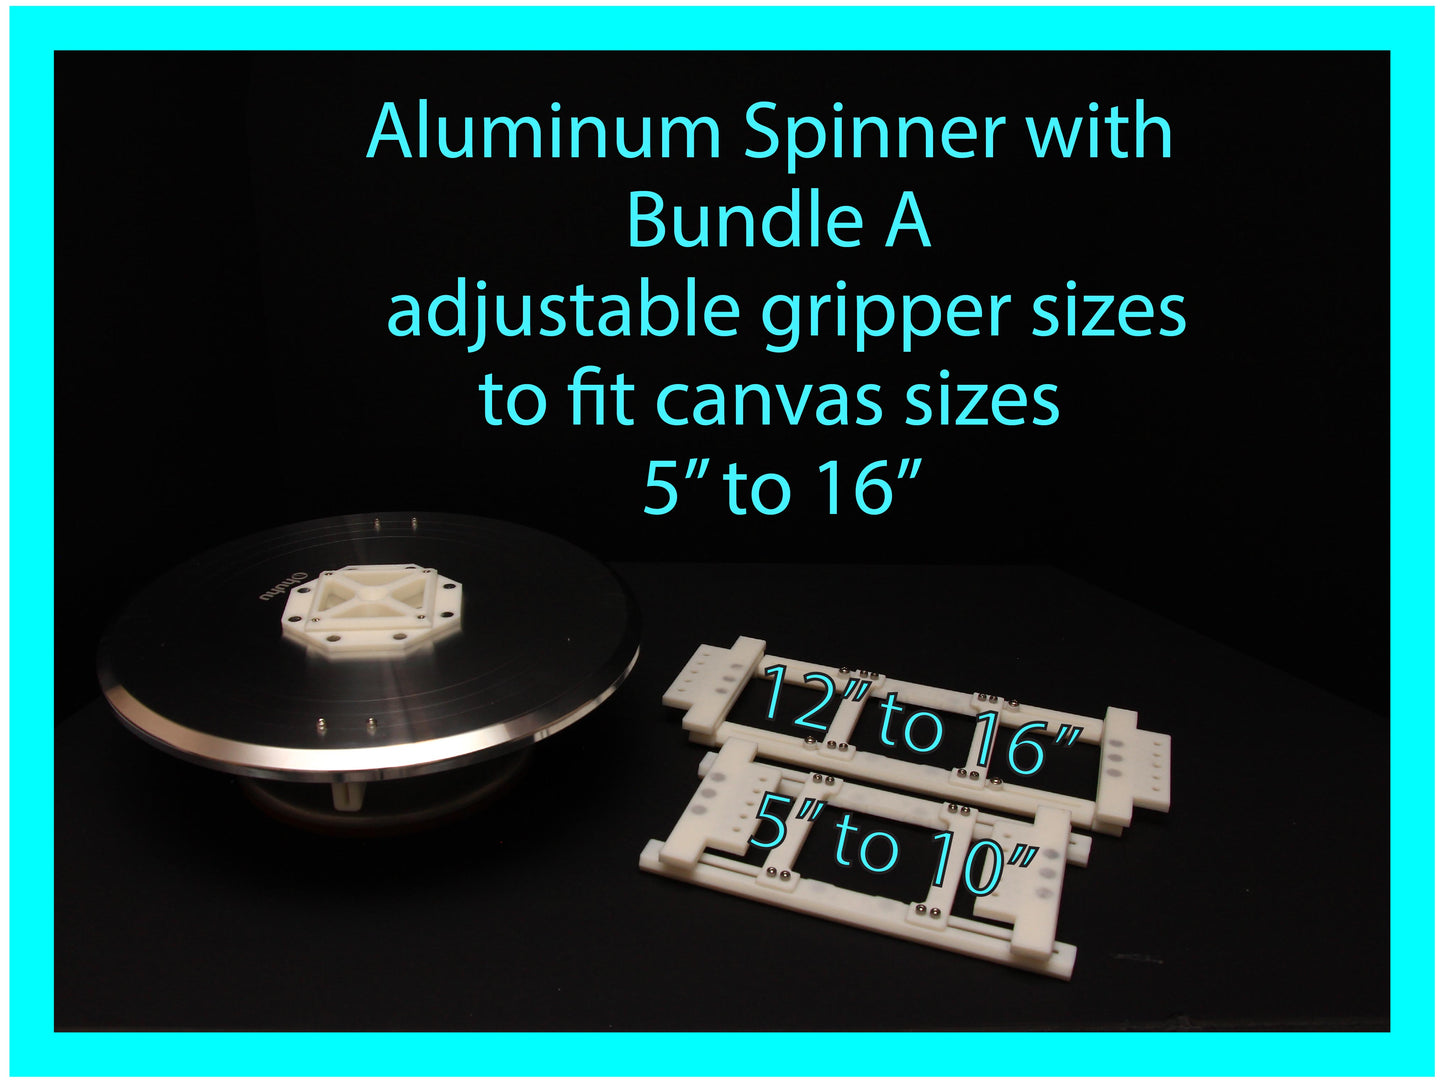 Manual Canvas Spinner (NOT Motorized) with Adjustable Magnetic Canvas Gripper Lazy Susan